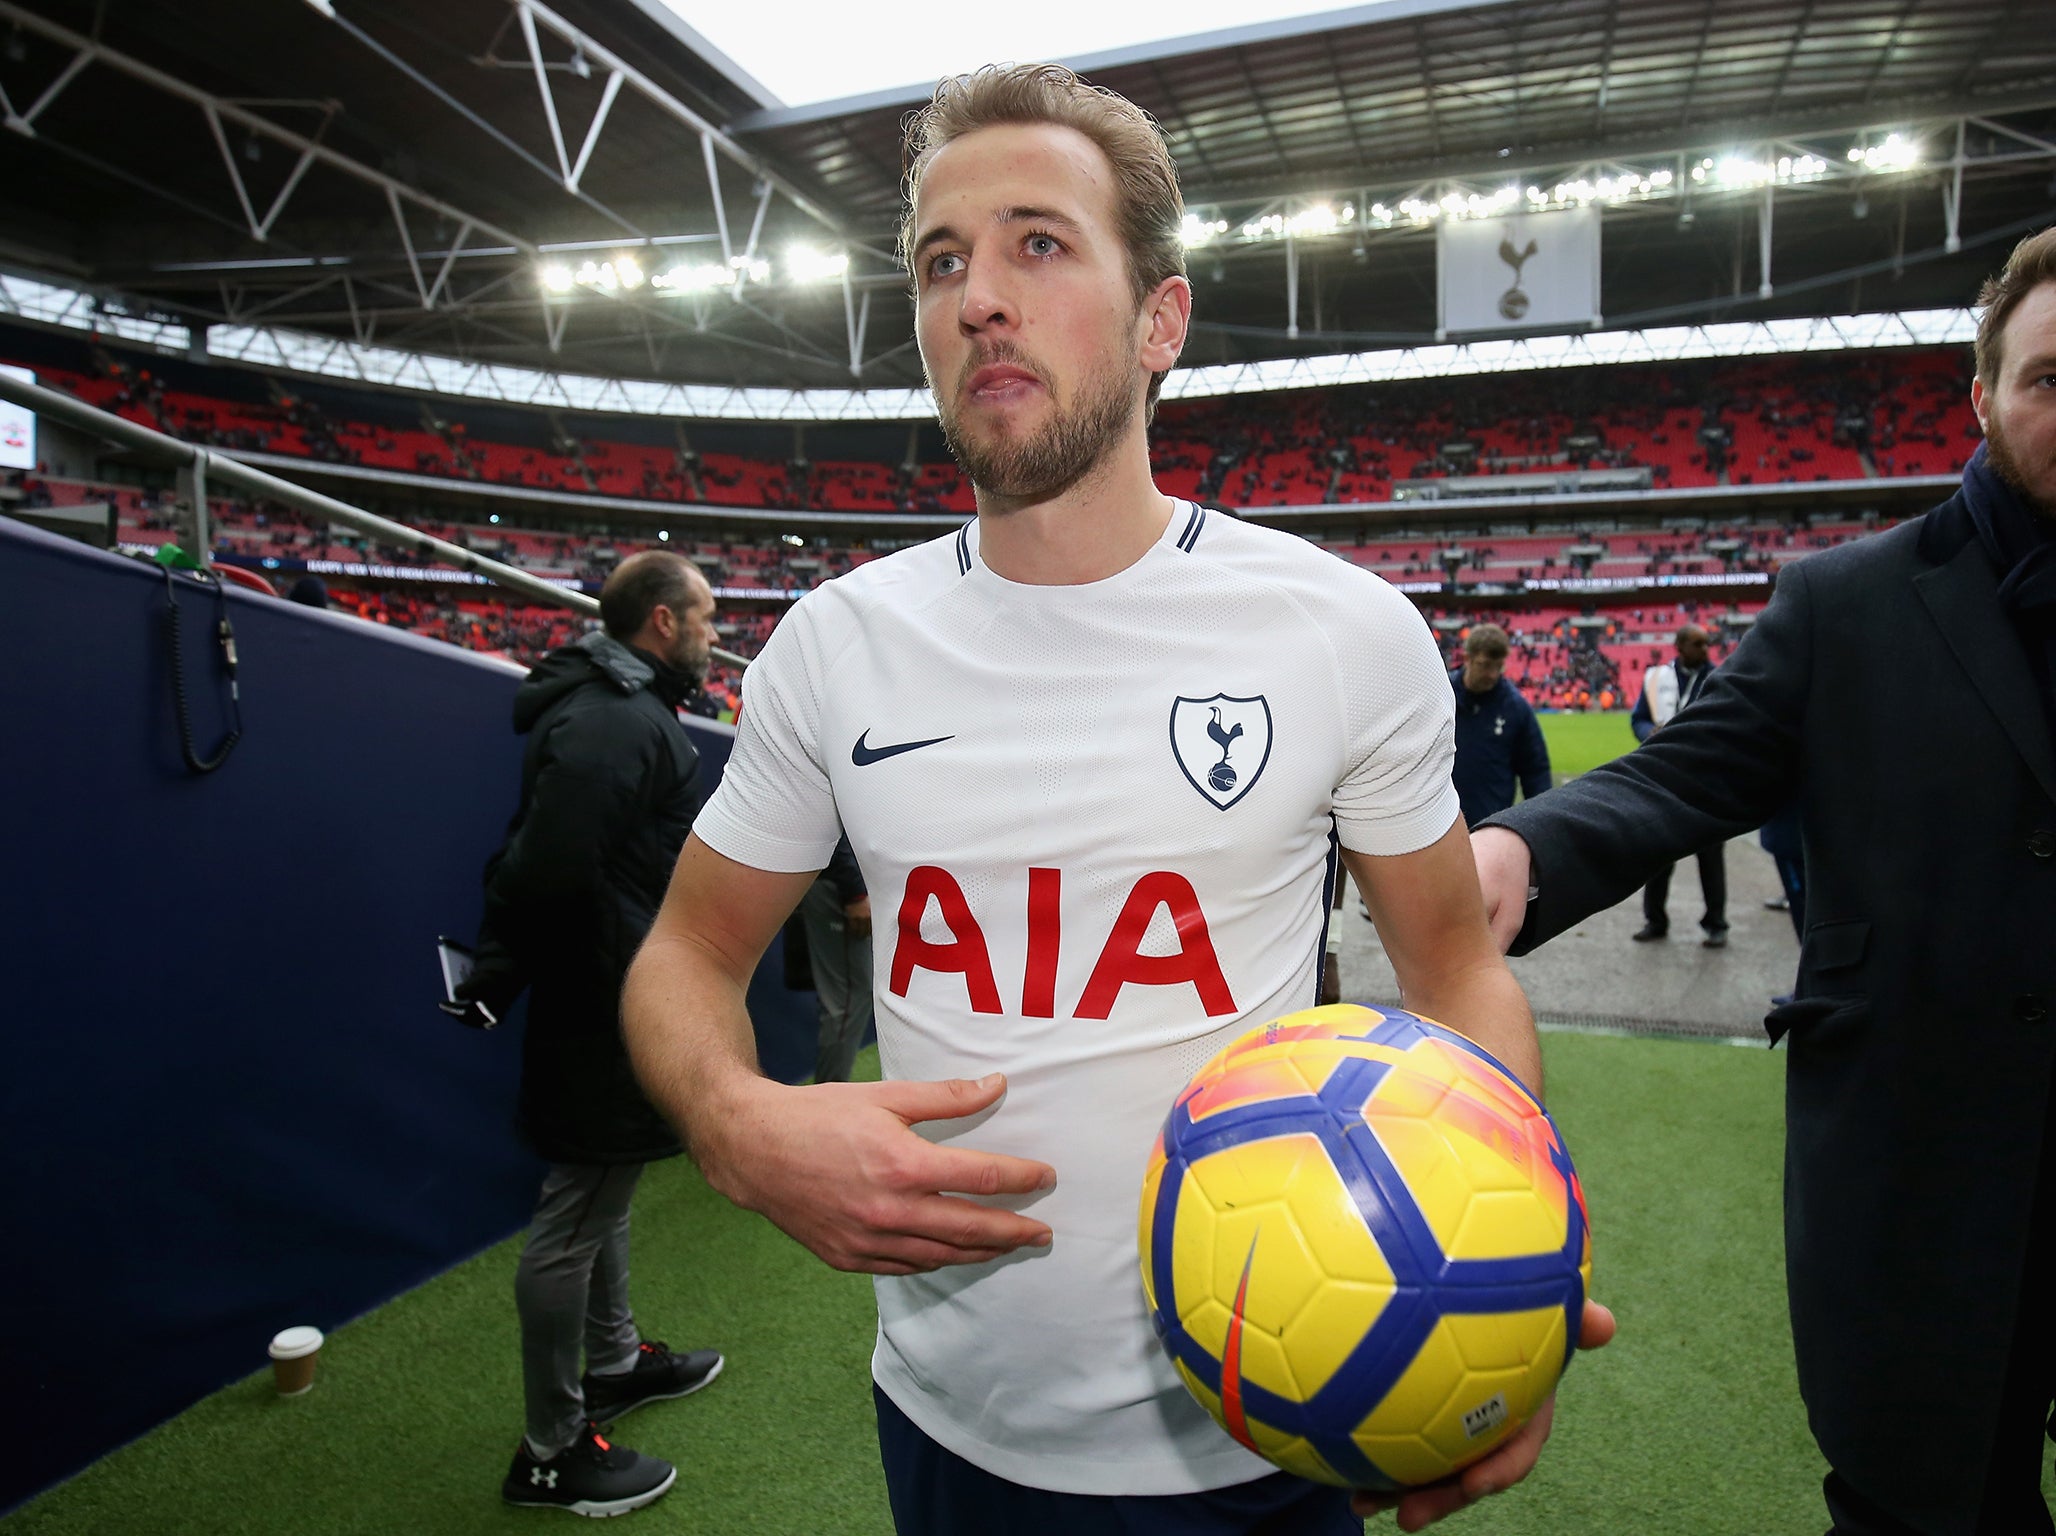 Kane has scored hat-tricks in consecutive Premier League matches